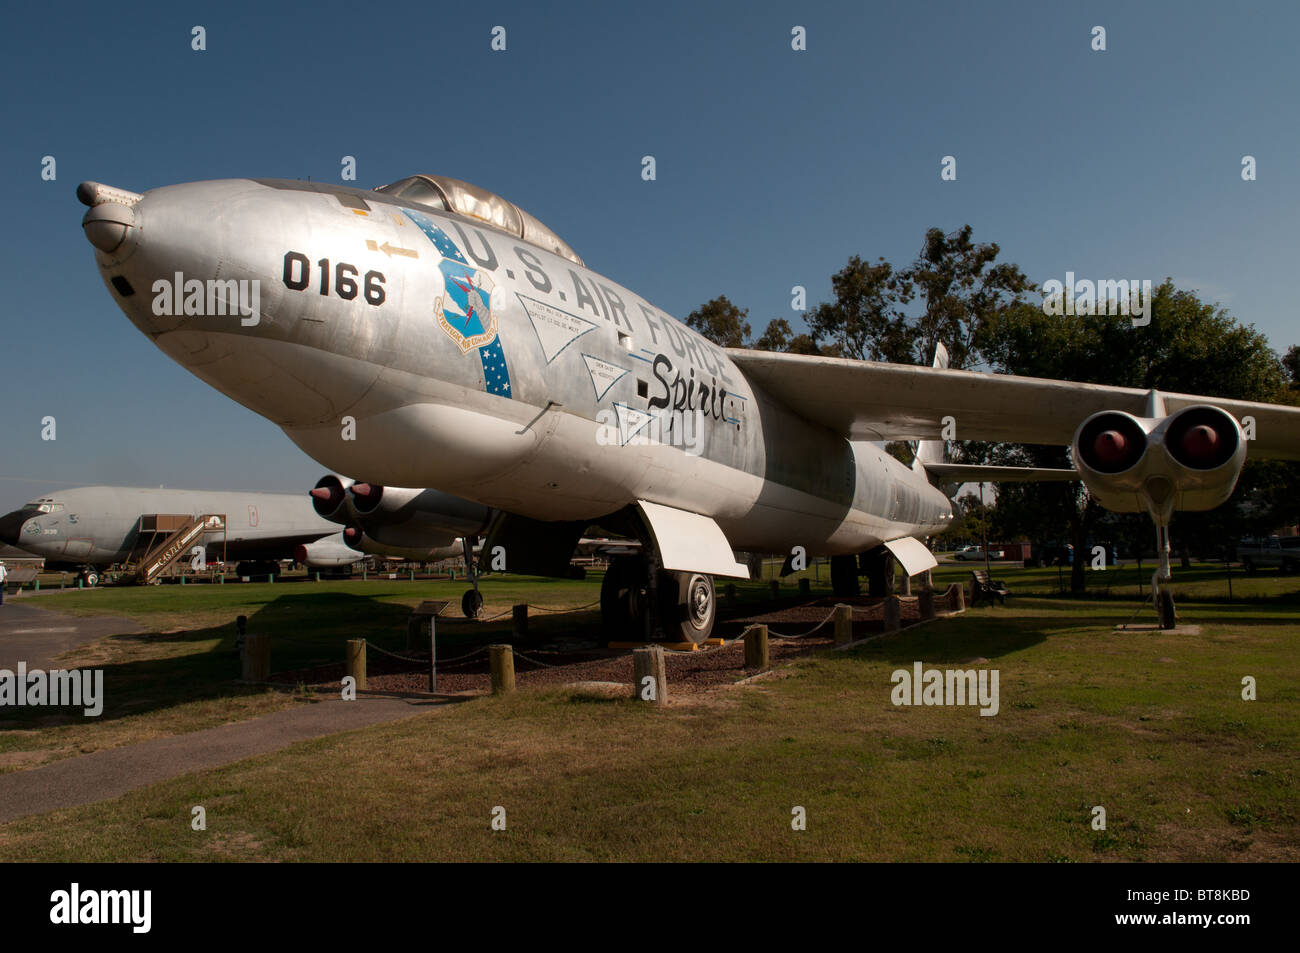 A B-47 bomber plane on display at the Castle Air Museum, Merced California USA. Stock Photo